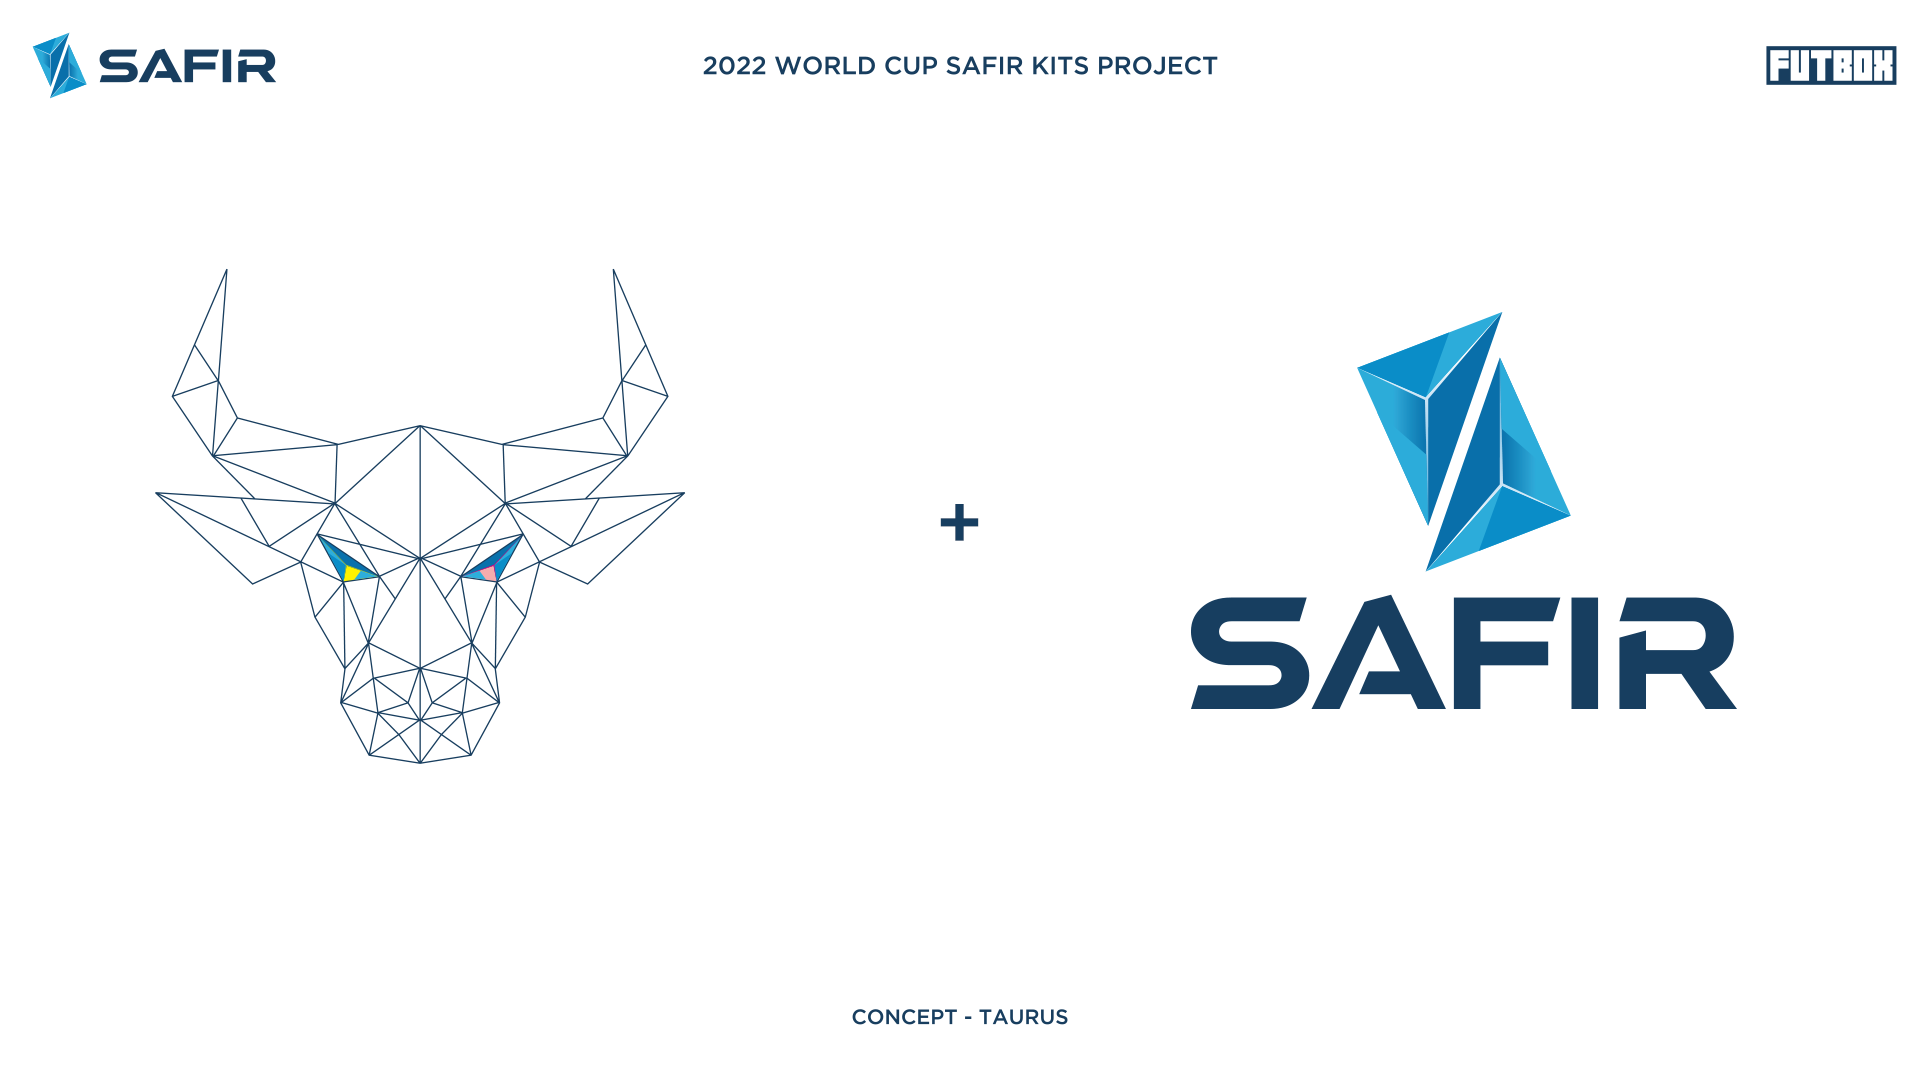 Fusion between the bull design, which was illustrated from the Safir logo, formed by crystals